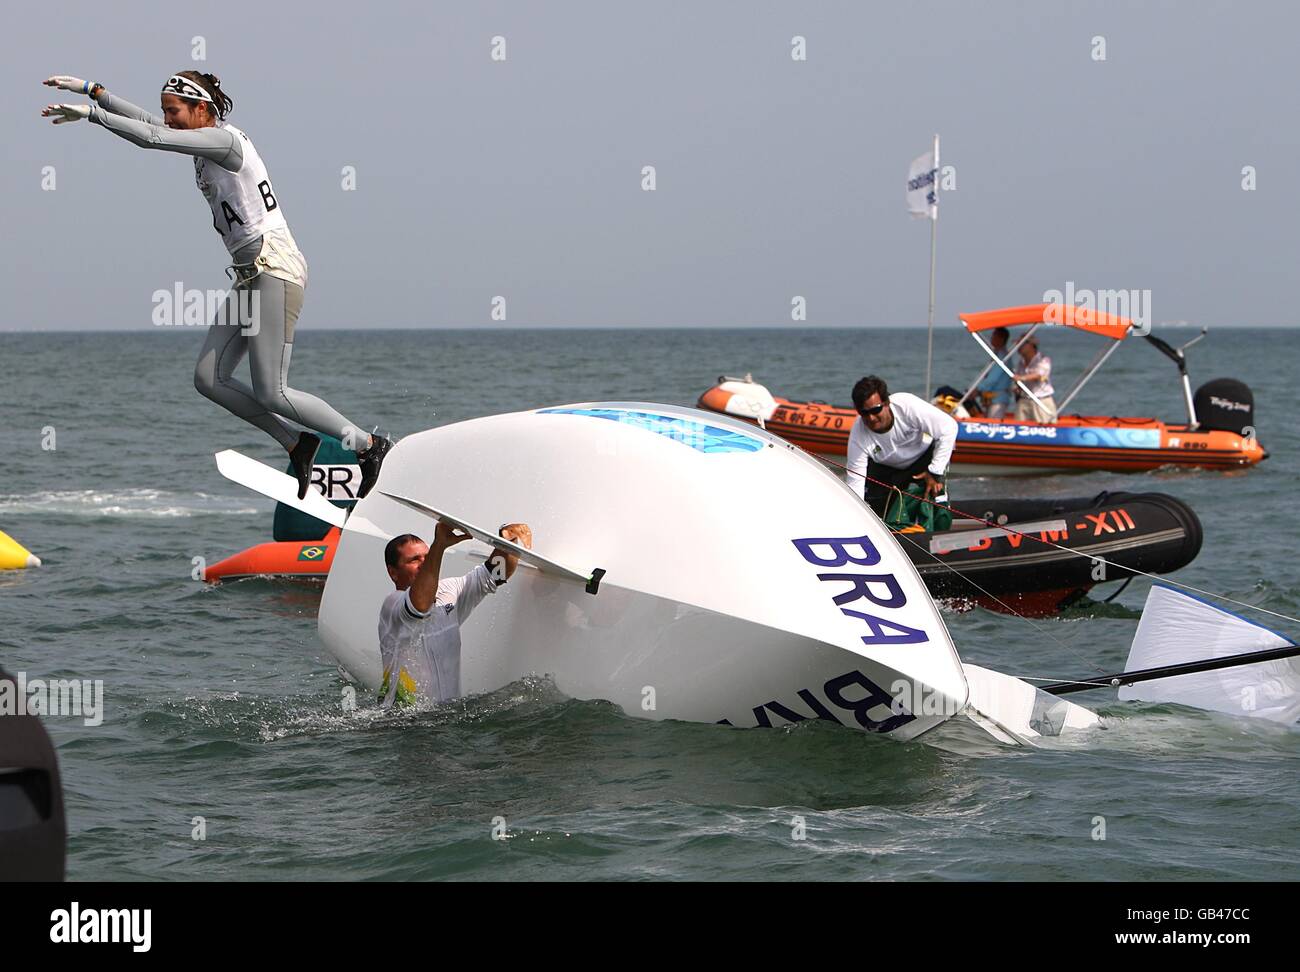 Brazil's Fernanda Oliveira and Isabel Swan bail into the water after their boat capsizes as they celebrate winning their final class race of the Women's 470 class during the 2008 Beijing Olympic Games' Sailing Centre in Qingdao, China. Stock Photo